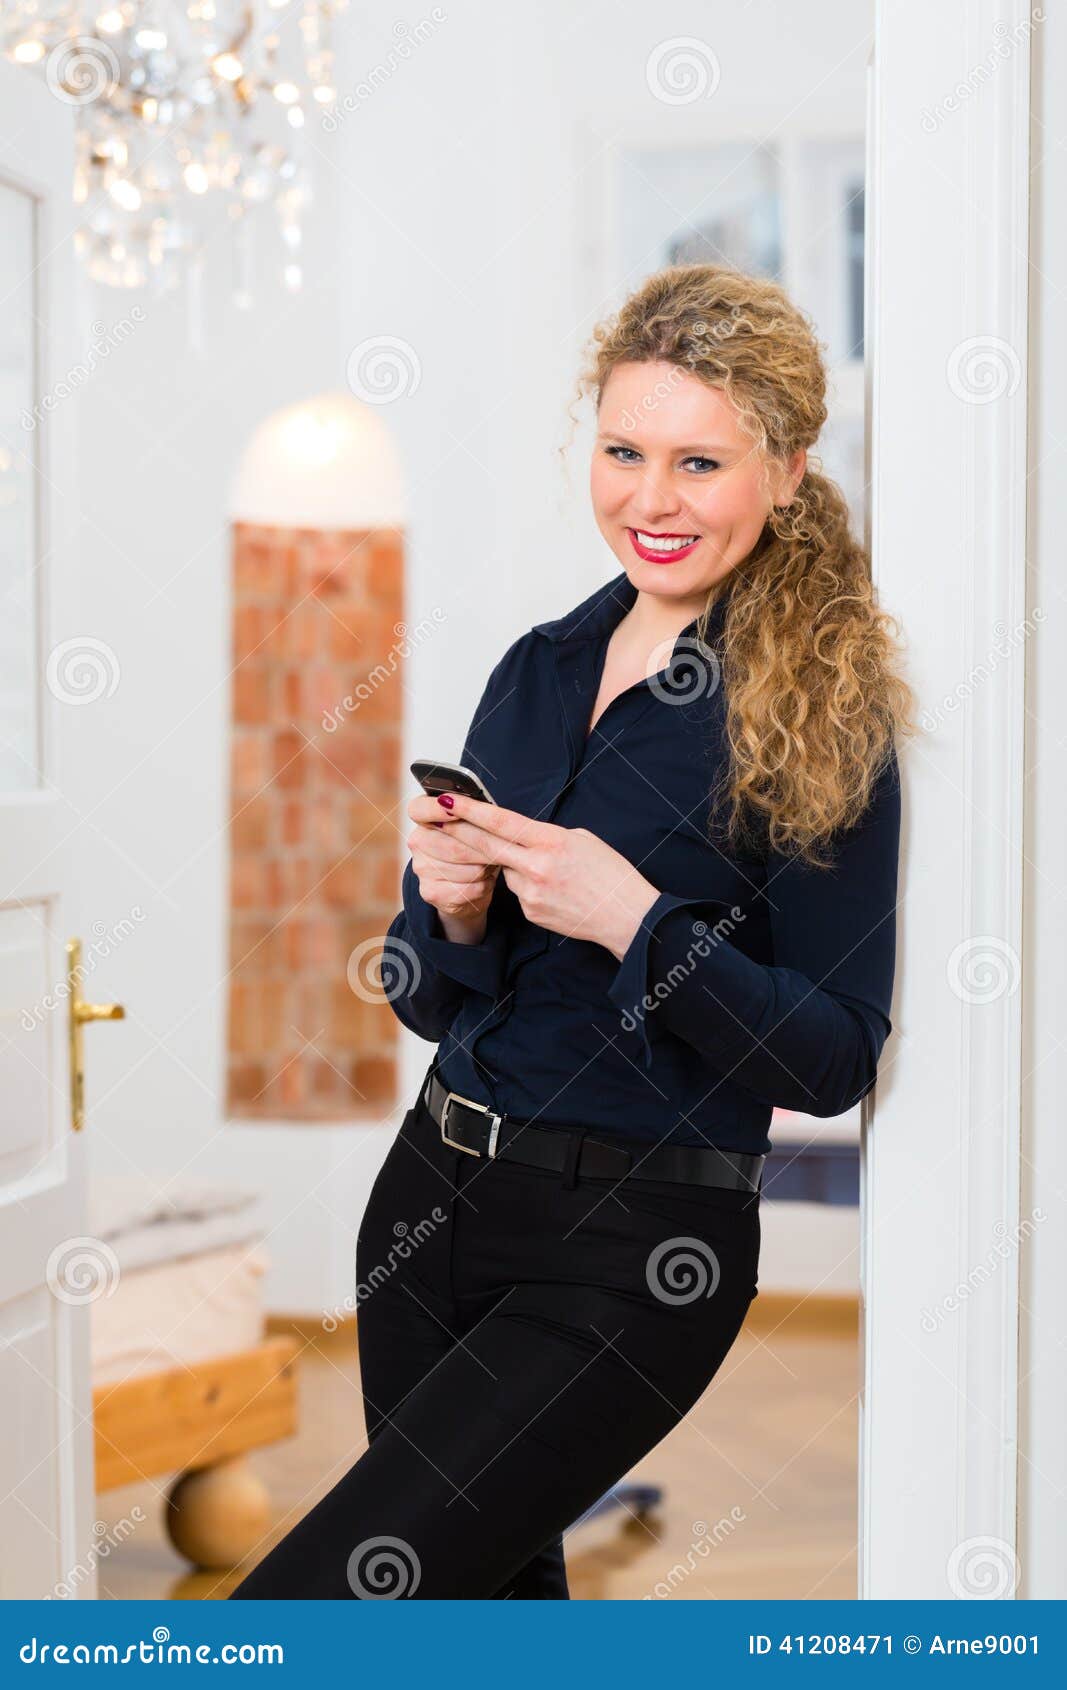 After Hour - Young Woman Resting At Home Stock Image 